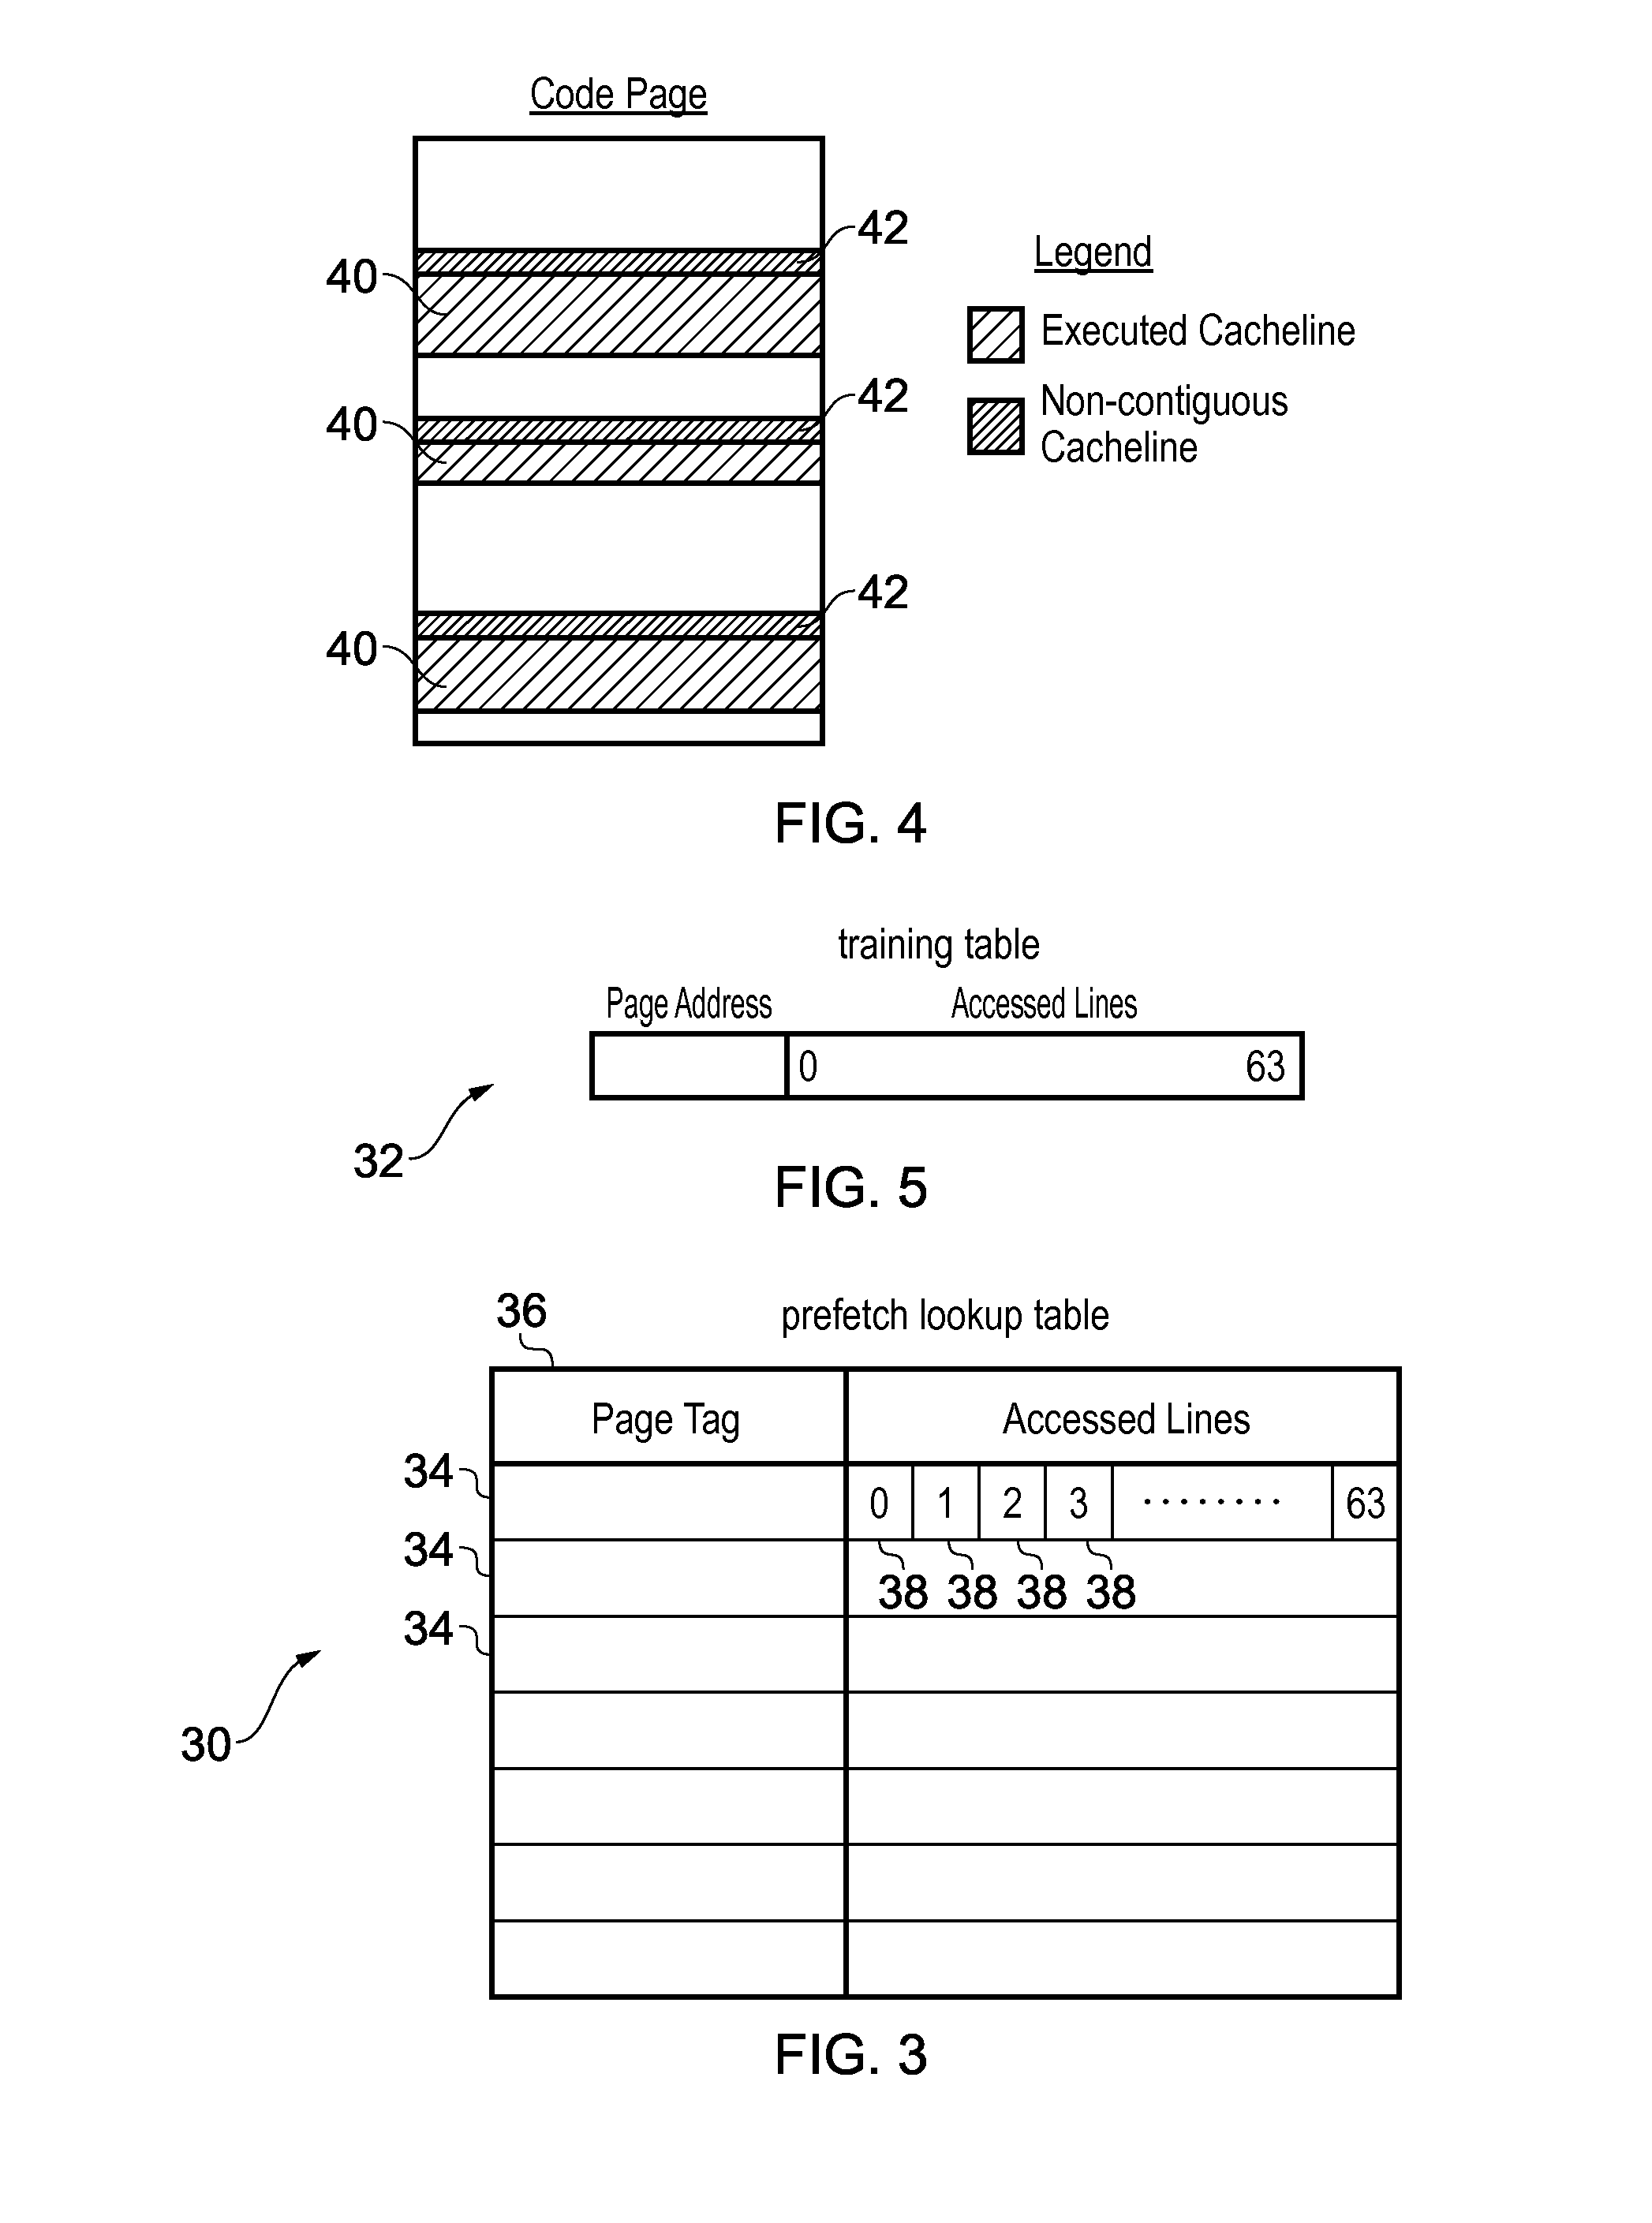 Prefetching instructions in a data processing apparatus